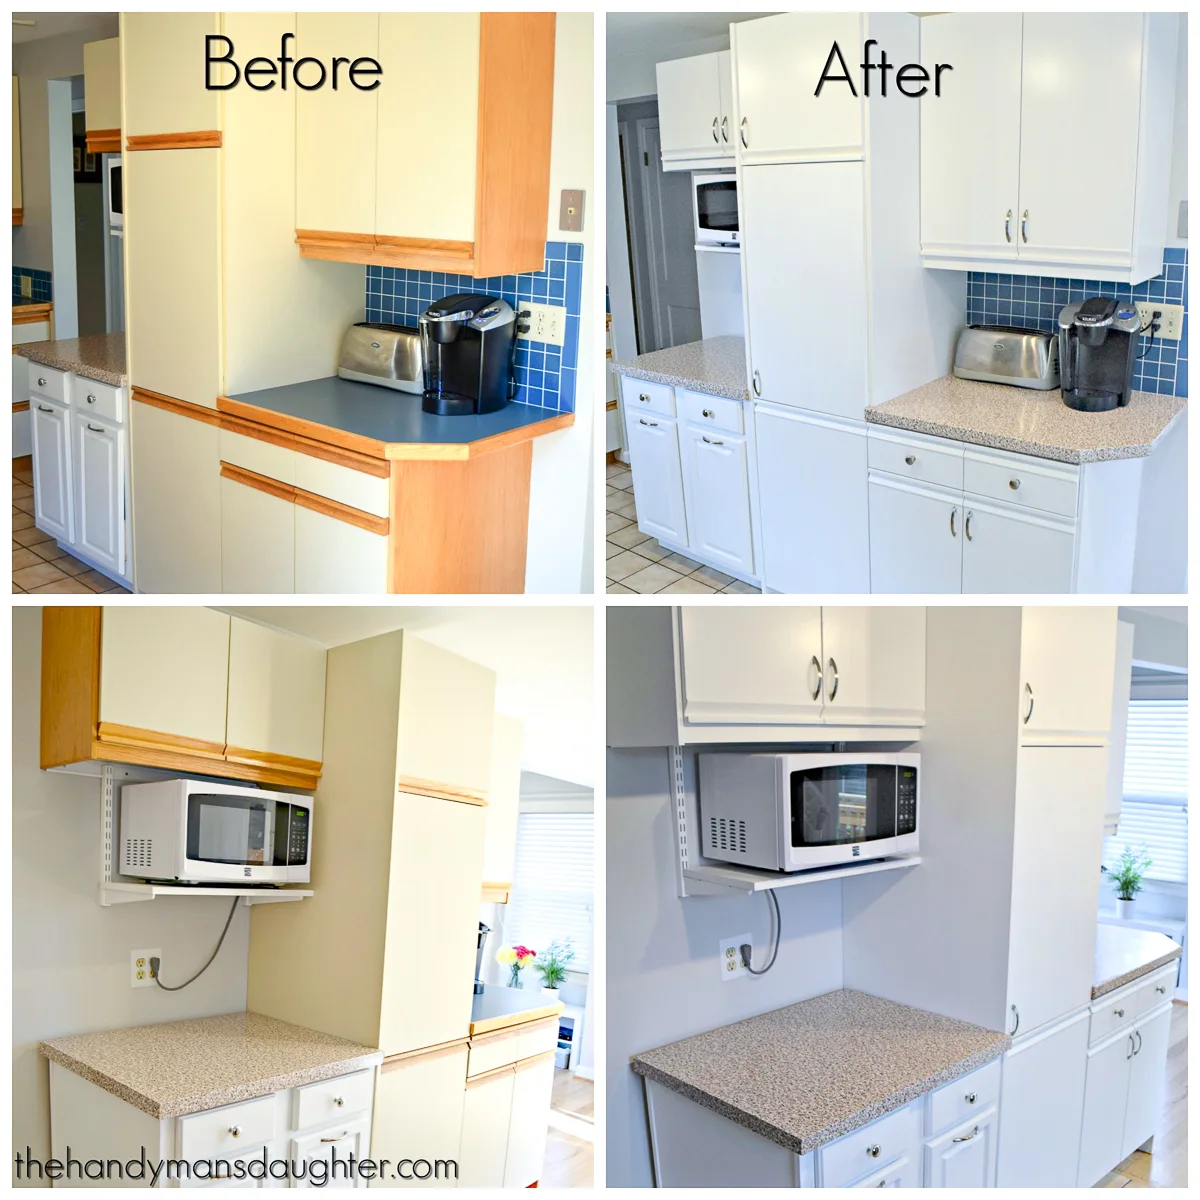 How To Paint Laminate Cabinets Before After .webp